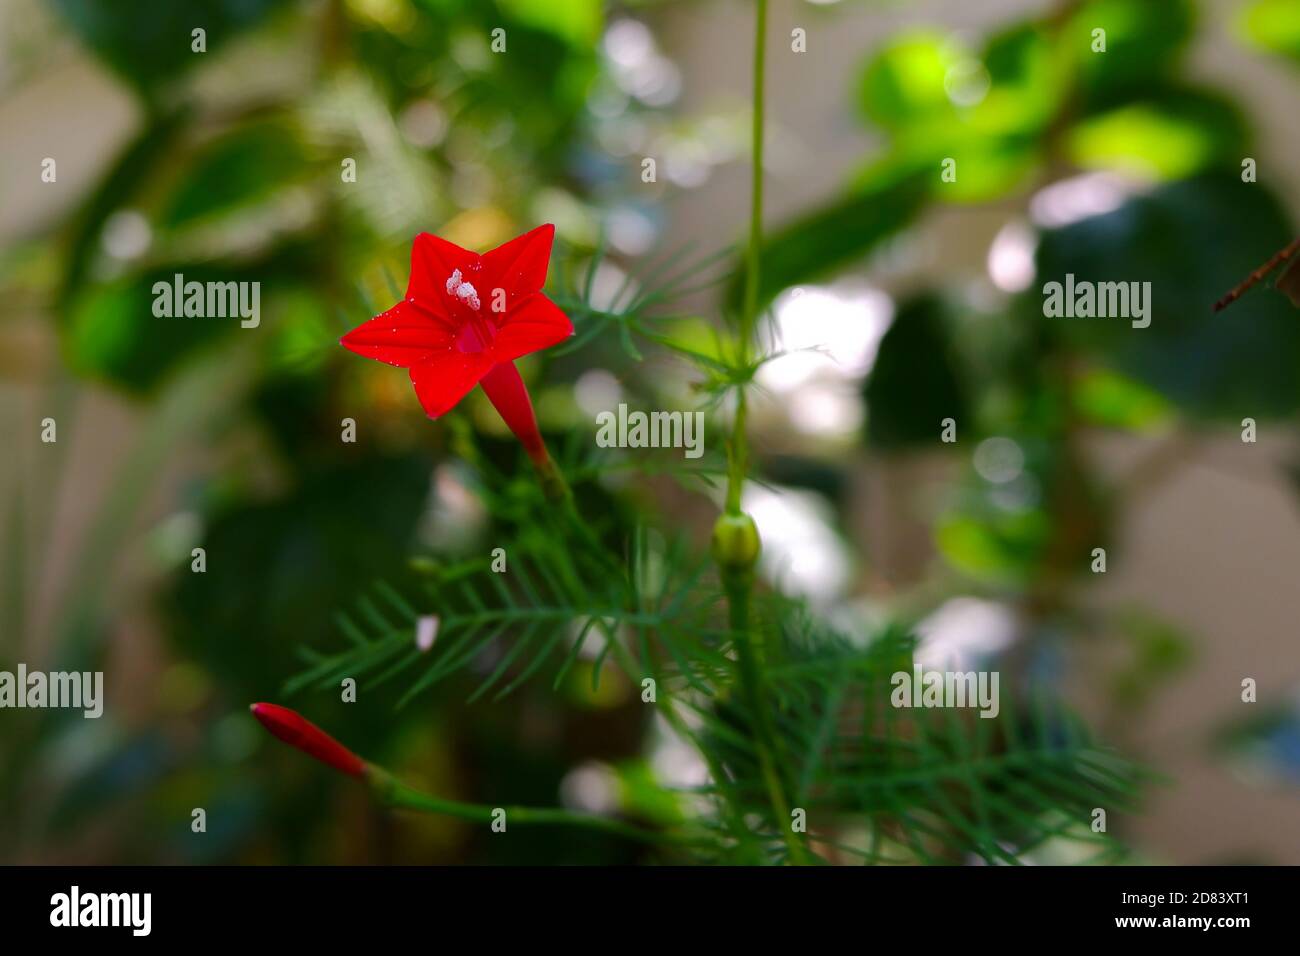 a closeup shot of red cypress vine (Ipomoclit species) flower & buds isolated on plant in garden Stock Photo